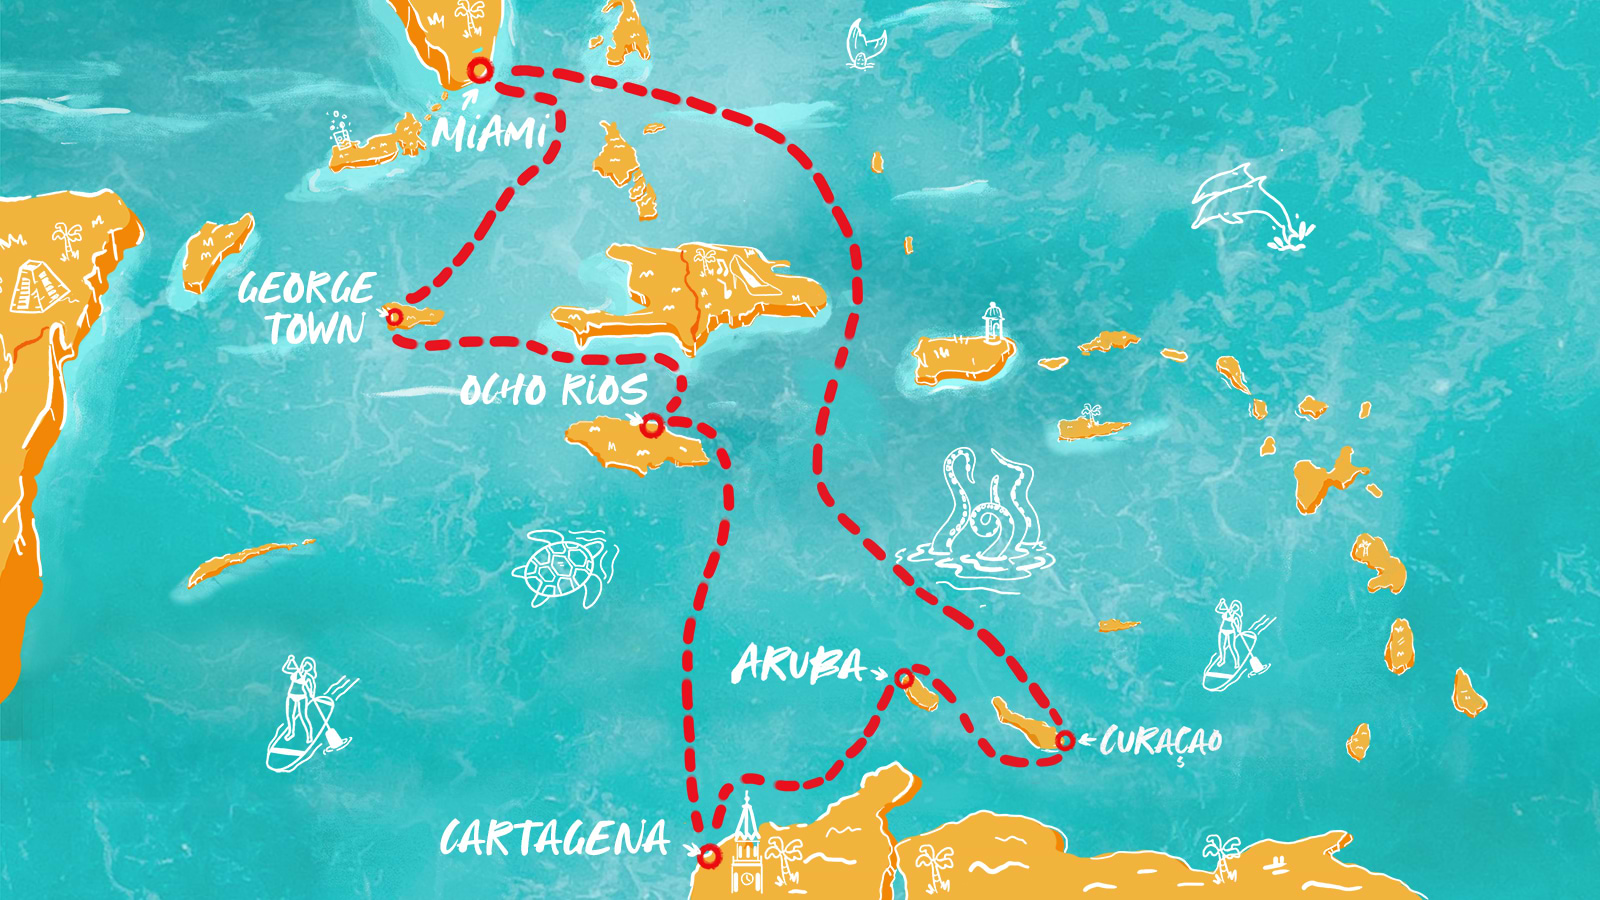 Map of Magnetic Miami to Gorgeous George Town itinerary